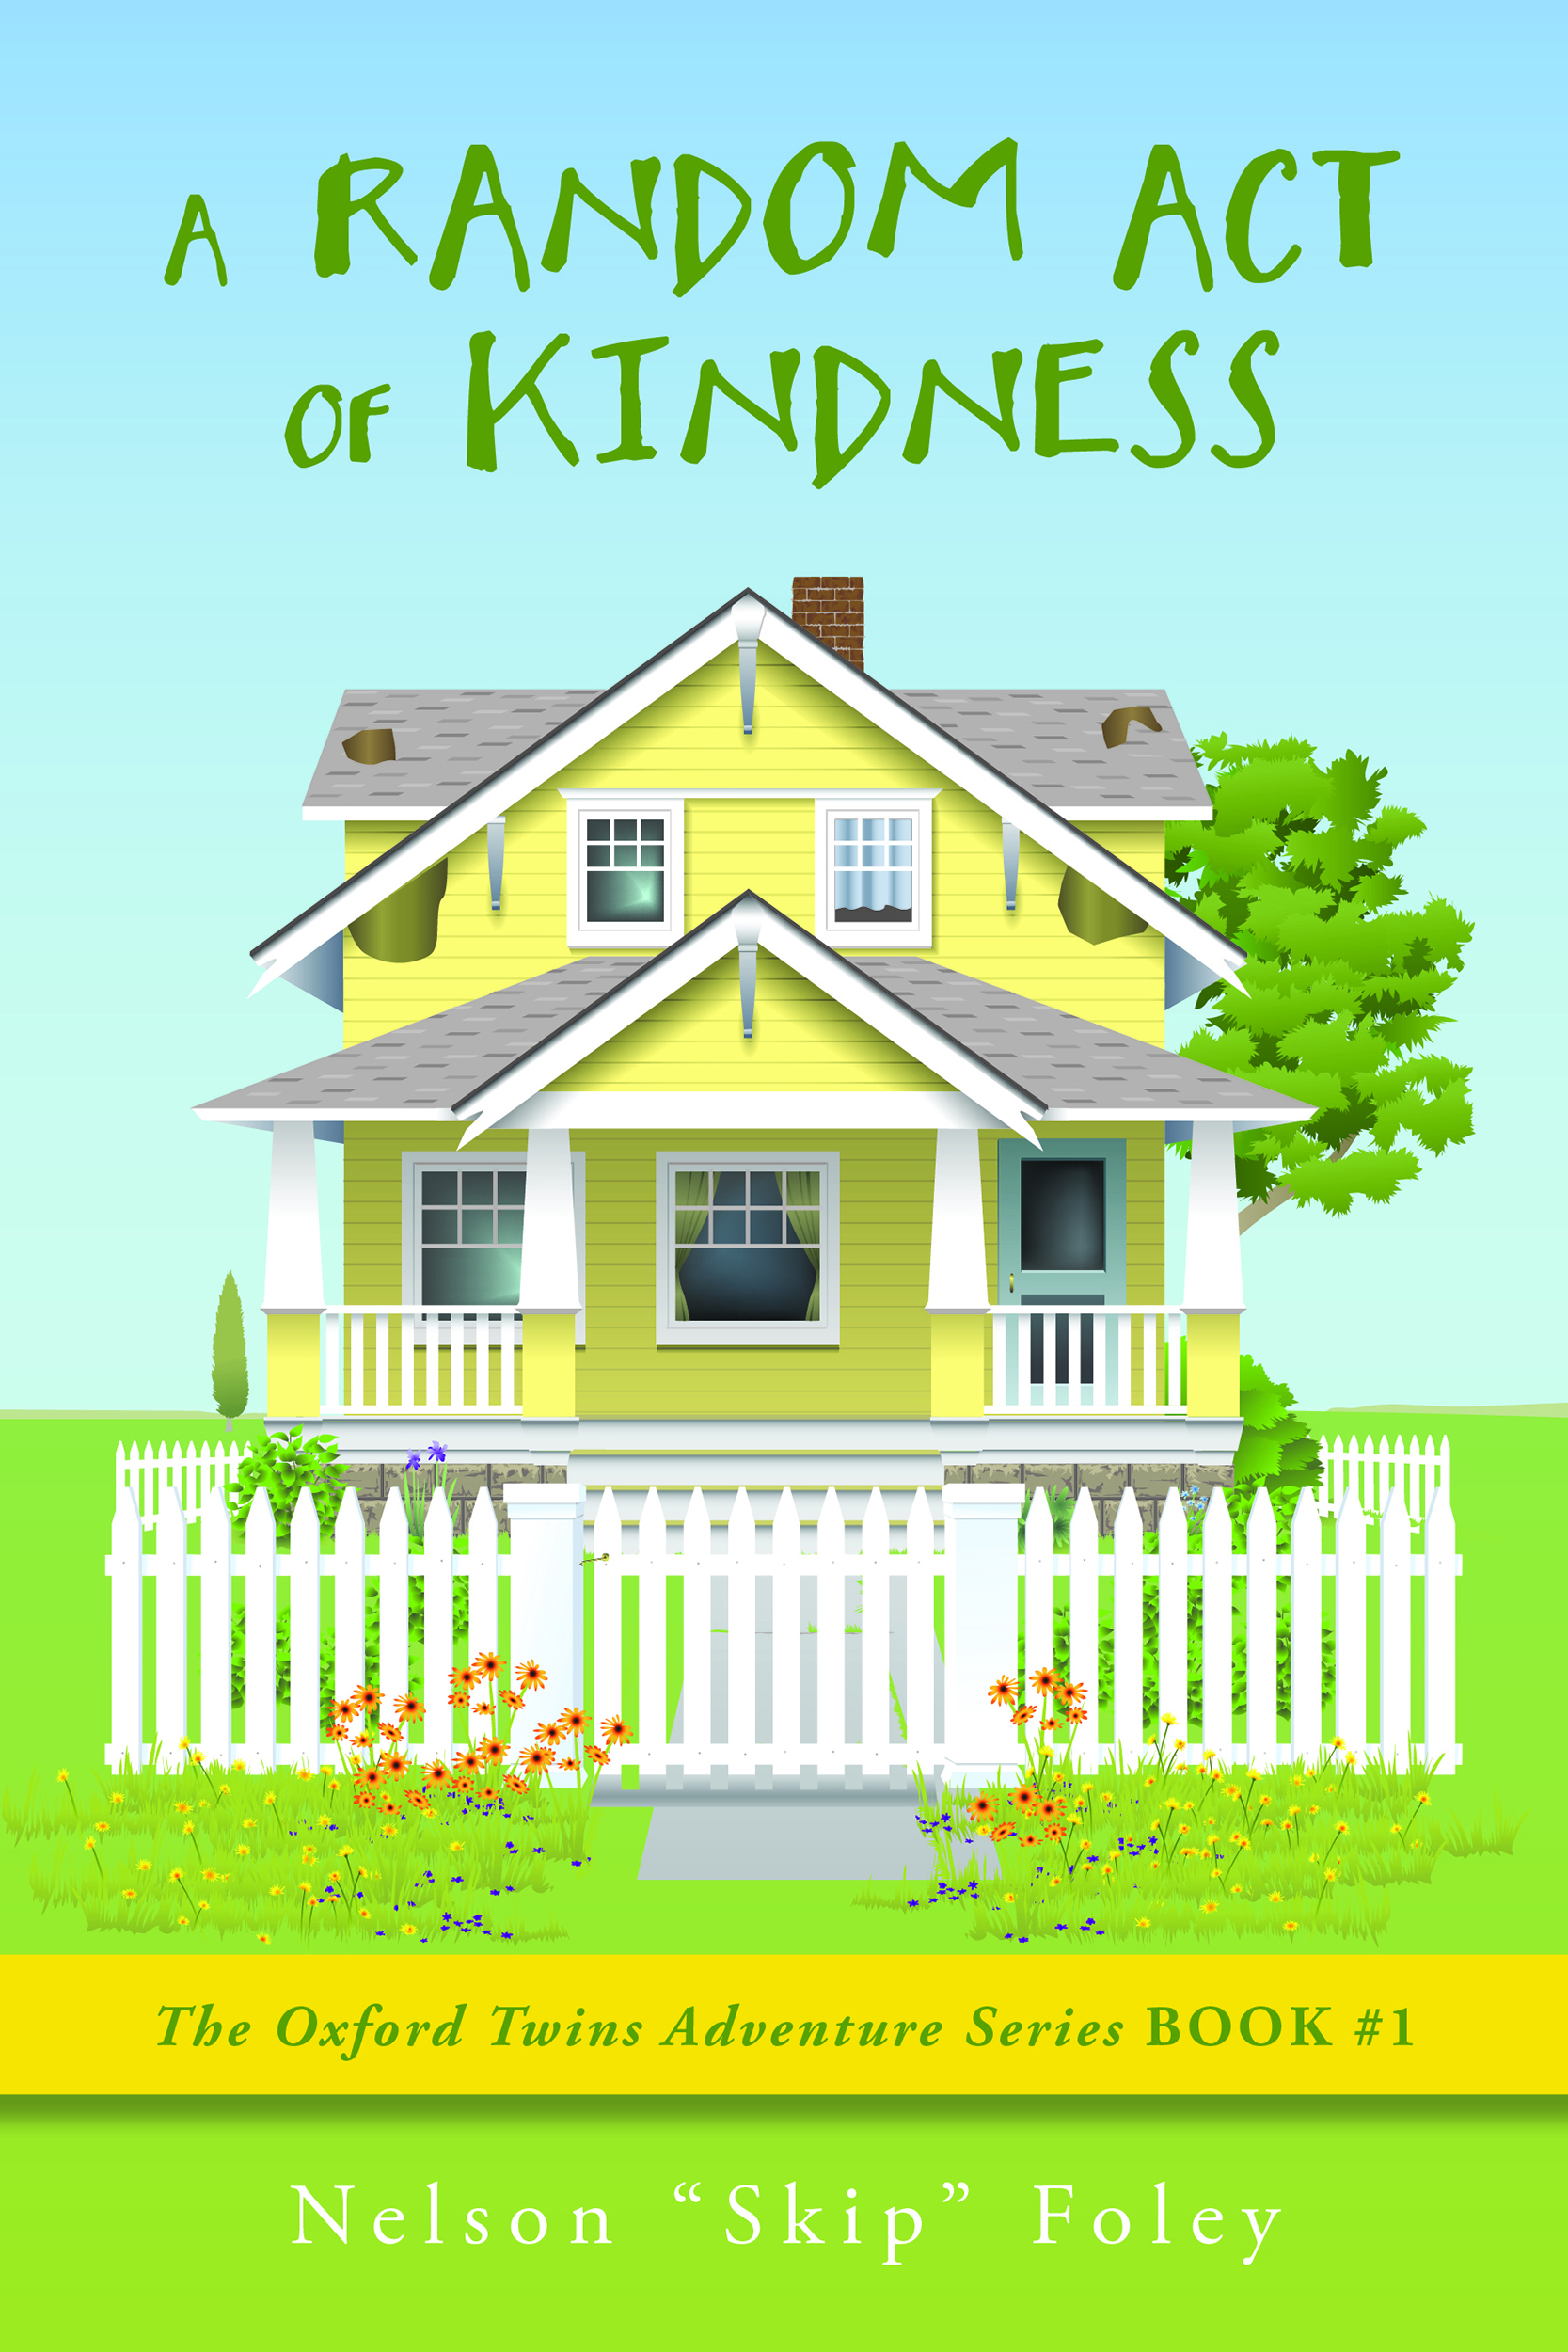 Image of book cover A Random Act of Kindness